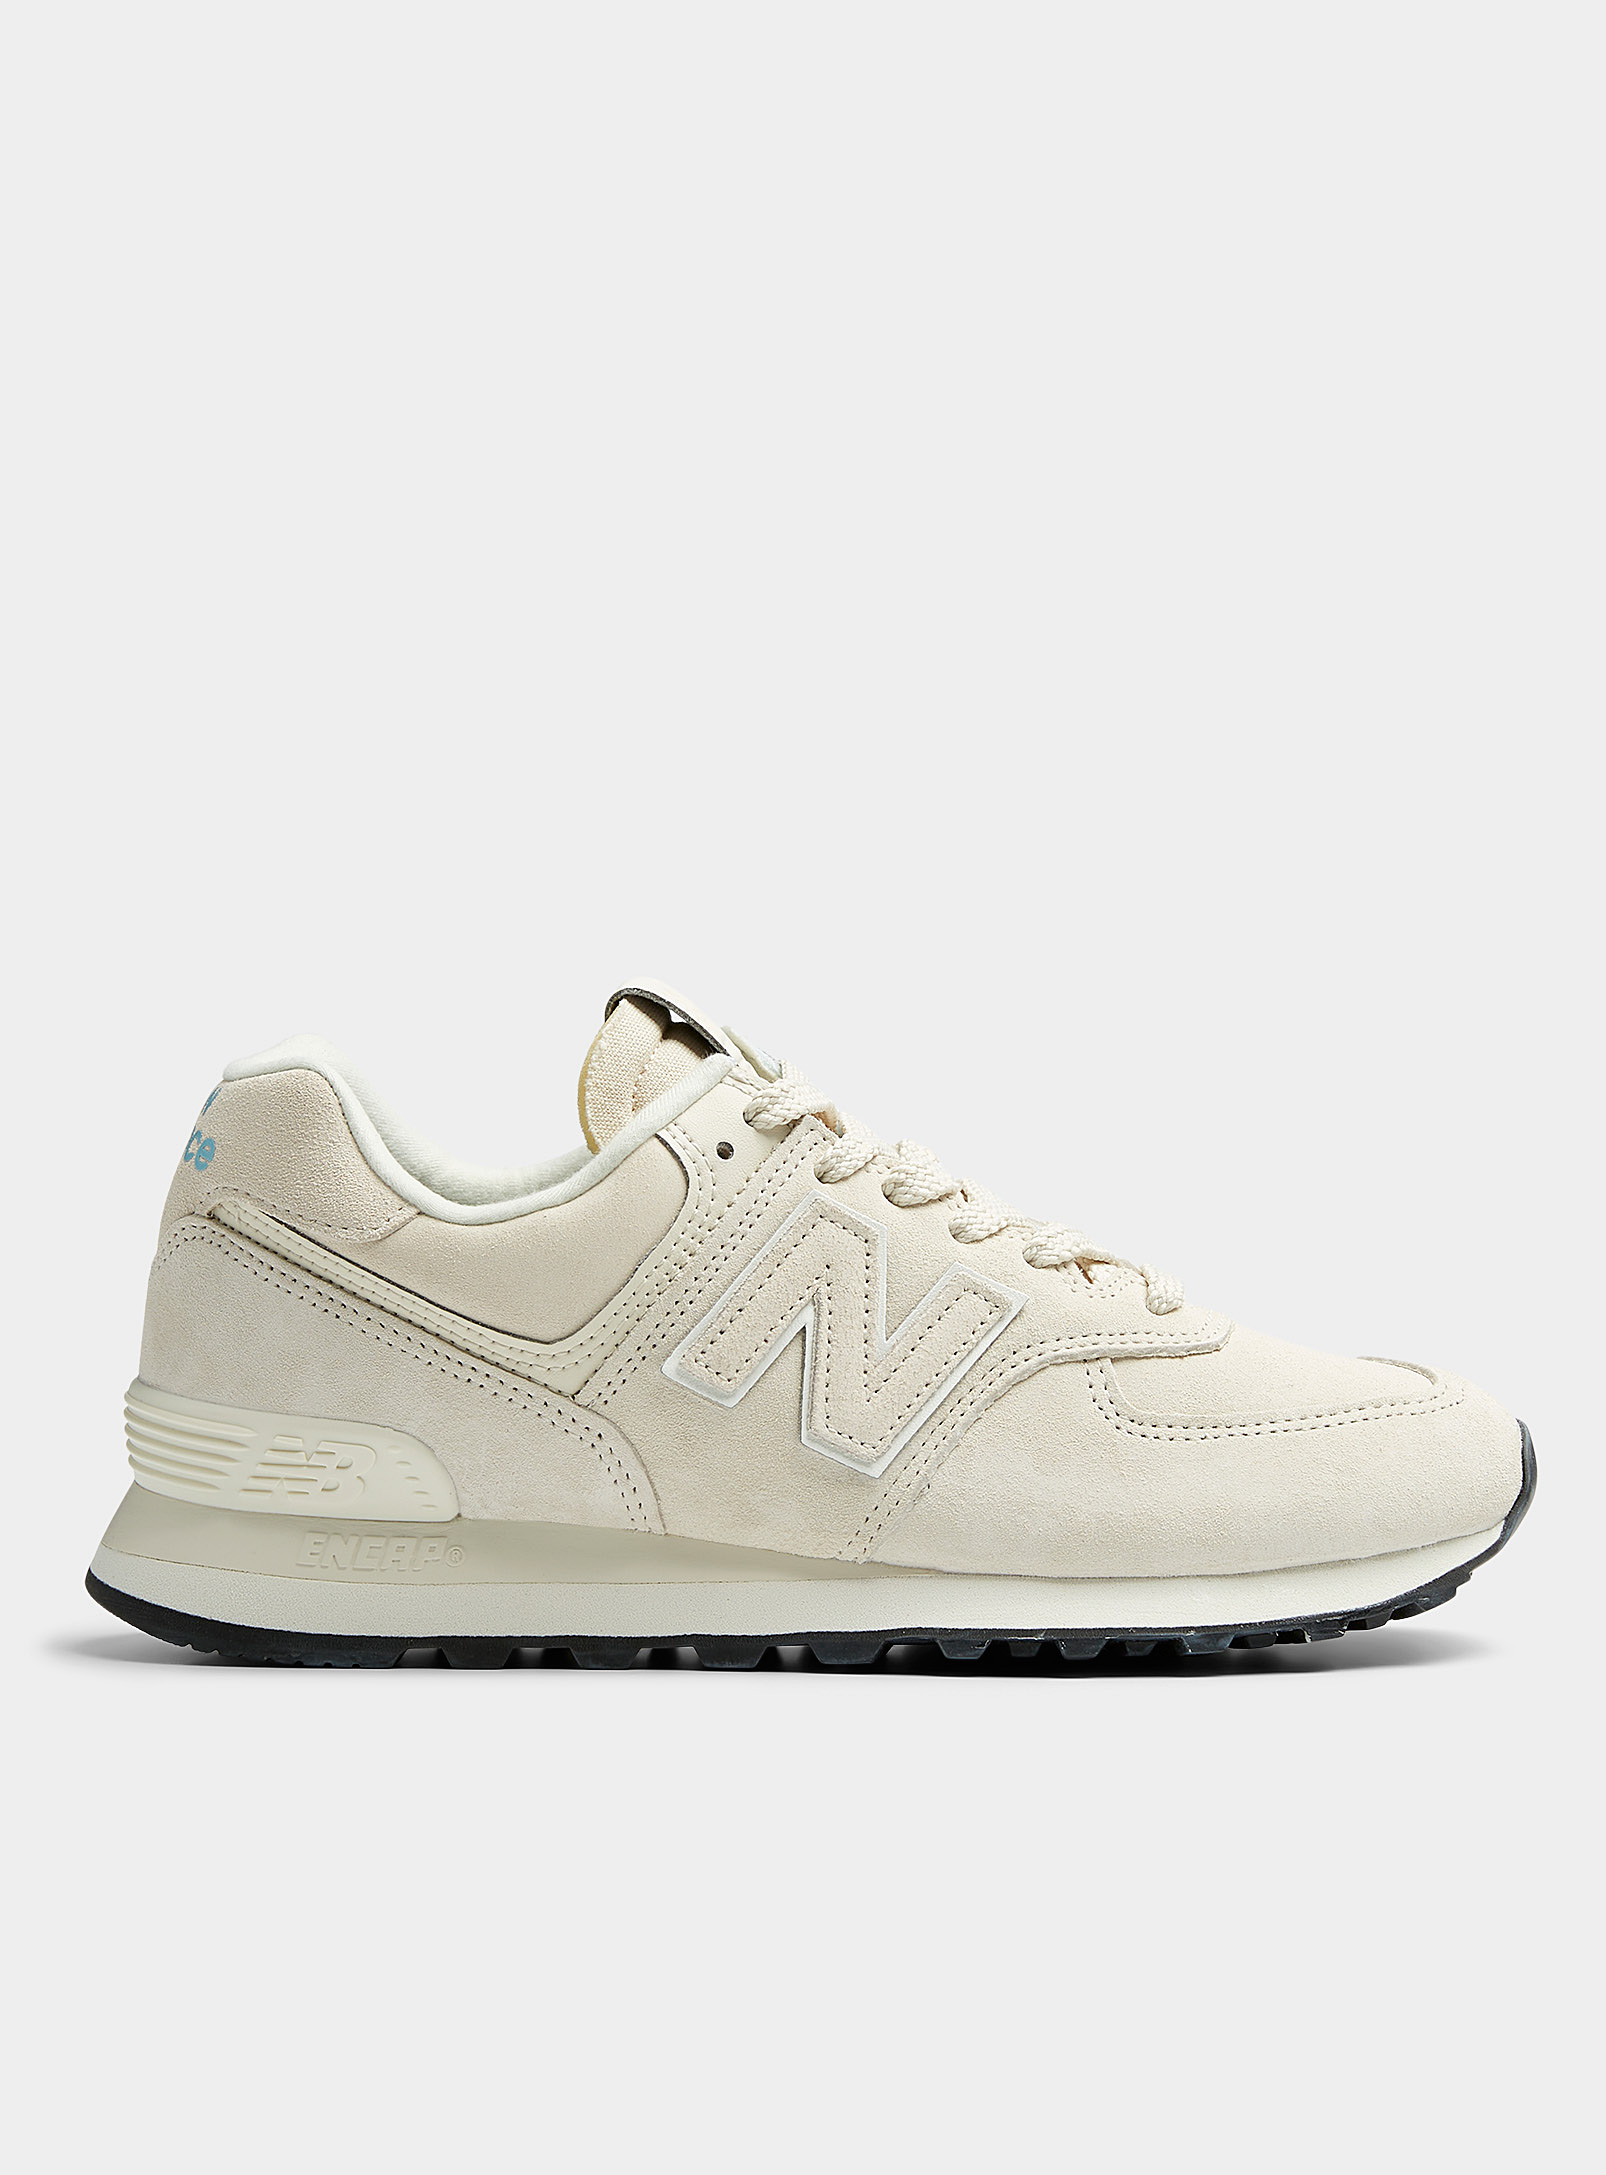 New Balance - Women's Suede and mesh 574 sneakers Women